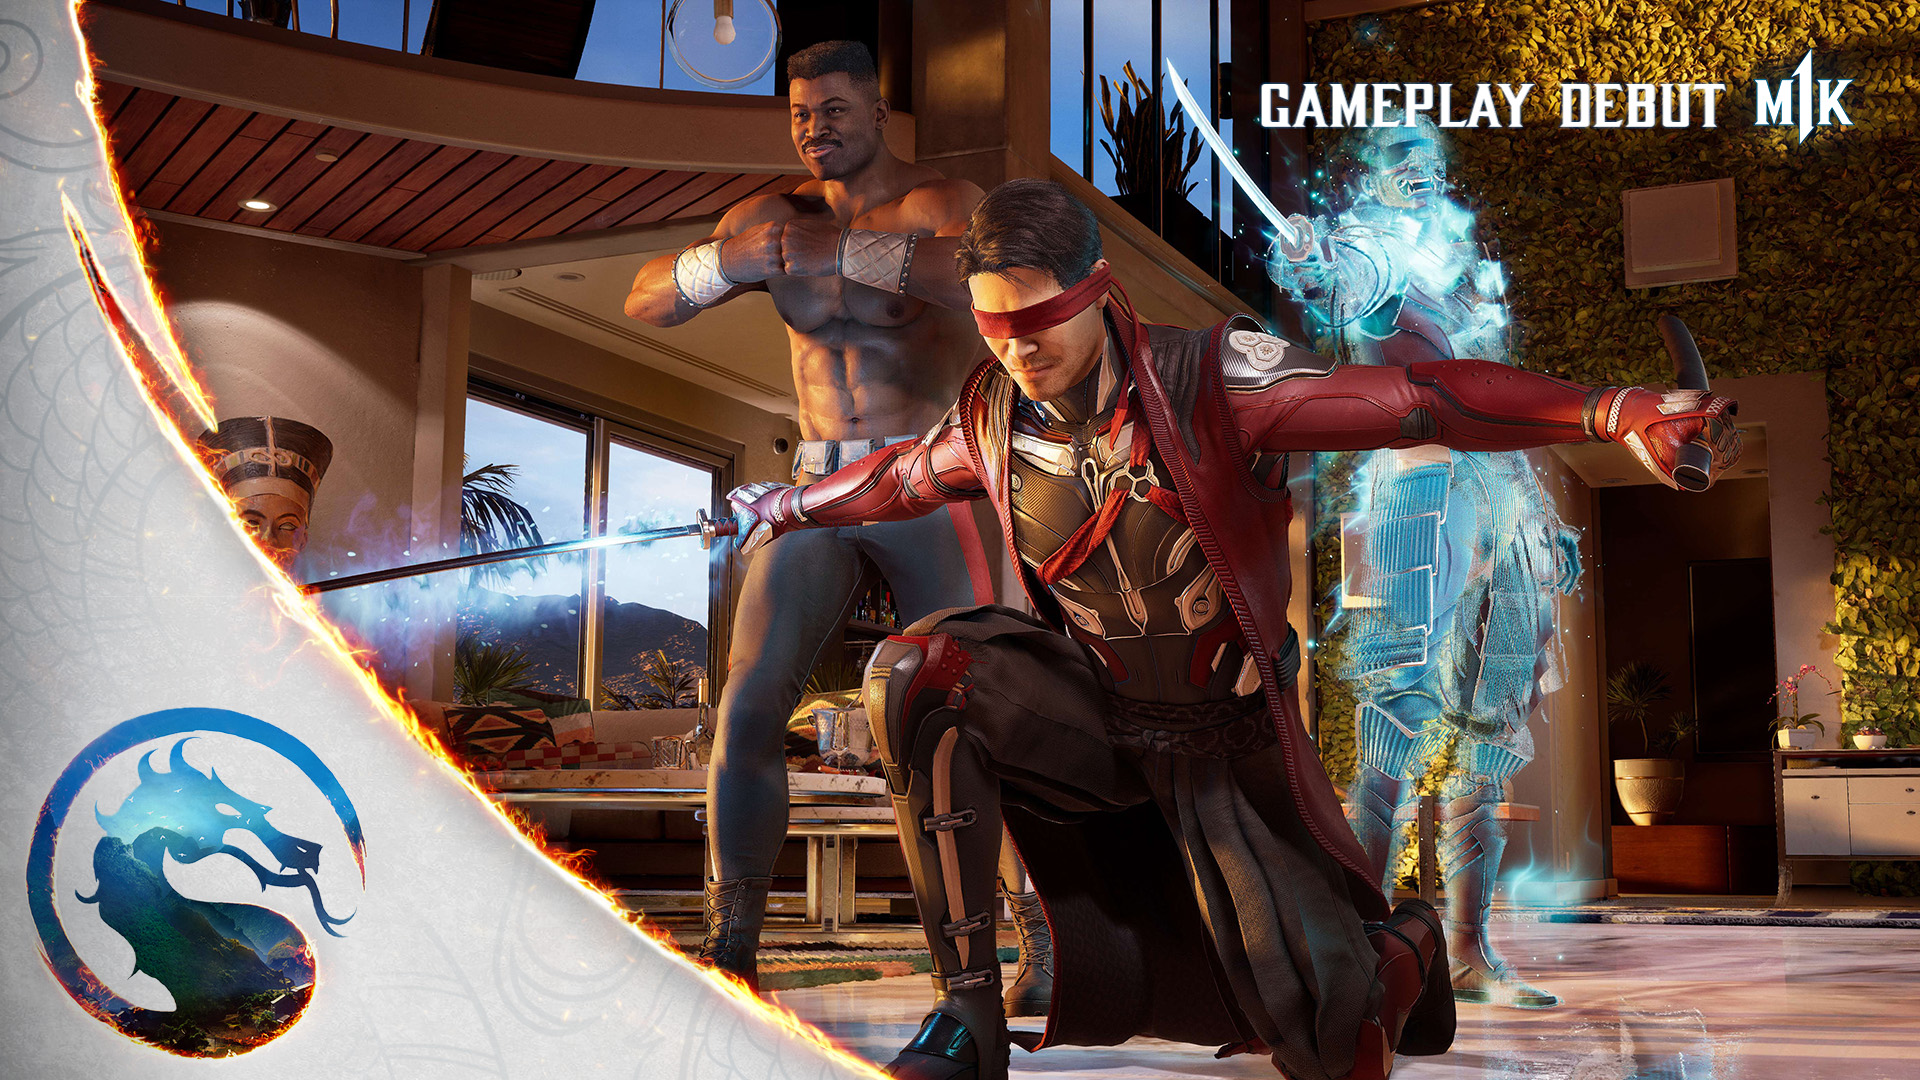 Summer Game Fest on X: JUST TWO DAYS UNTIL MORTAL KOMBAT 1 GAMEPLAY  REVEAL. Do not miss this moment at #SummerGameFest on Thursday, when Ed  Boon takes the stage to reveal an